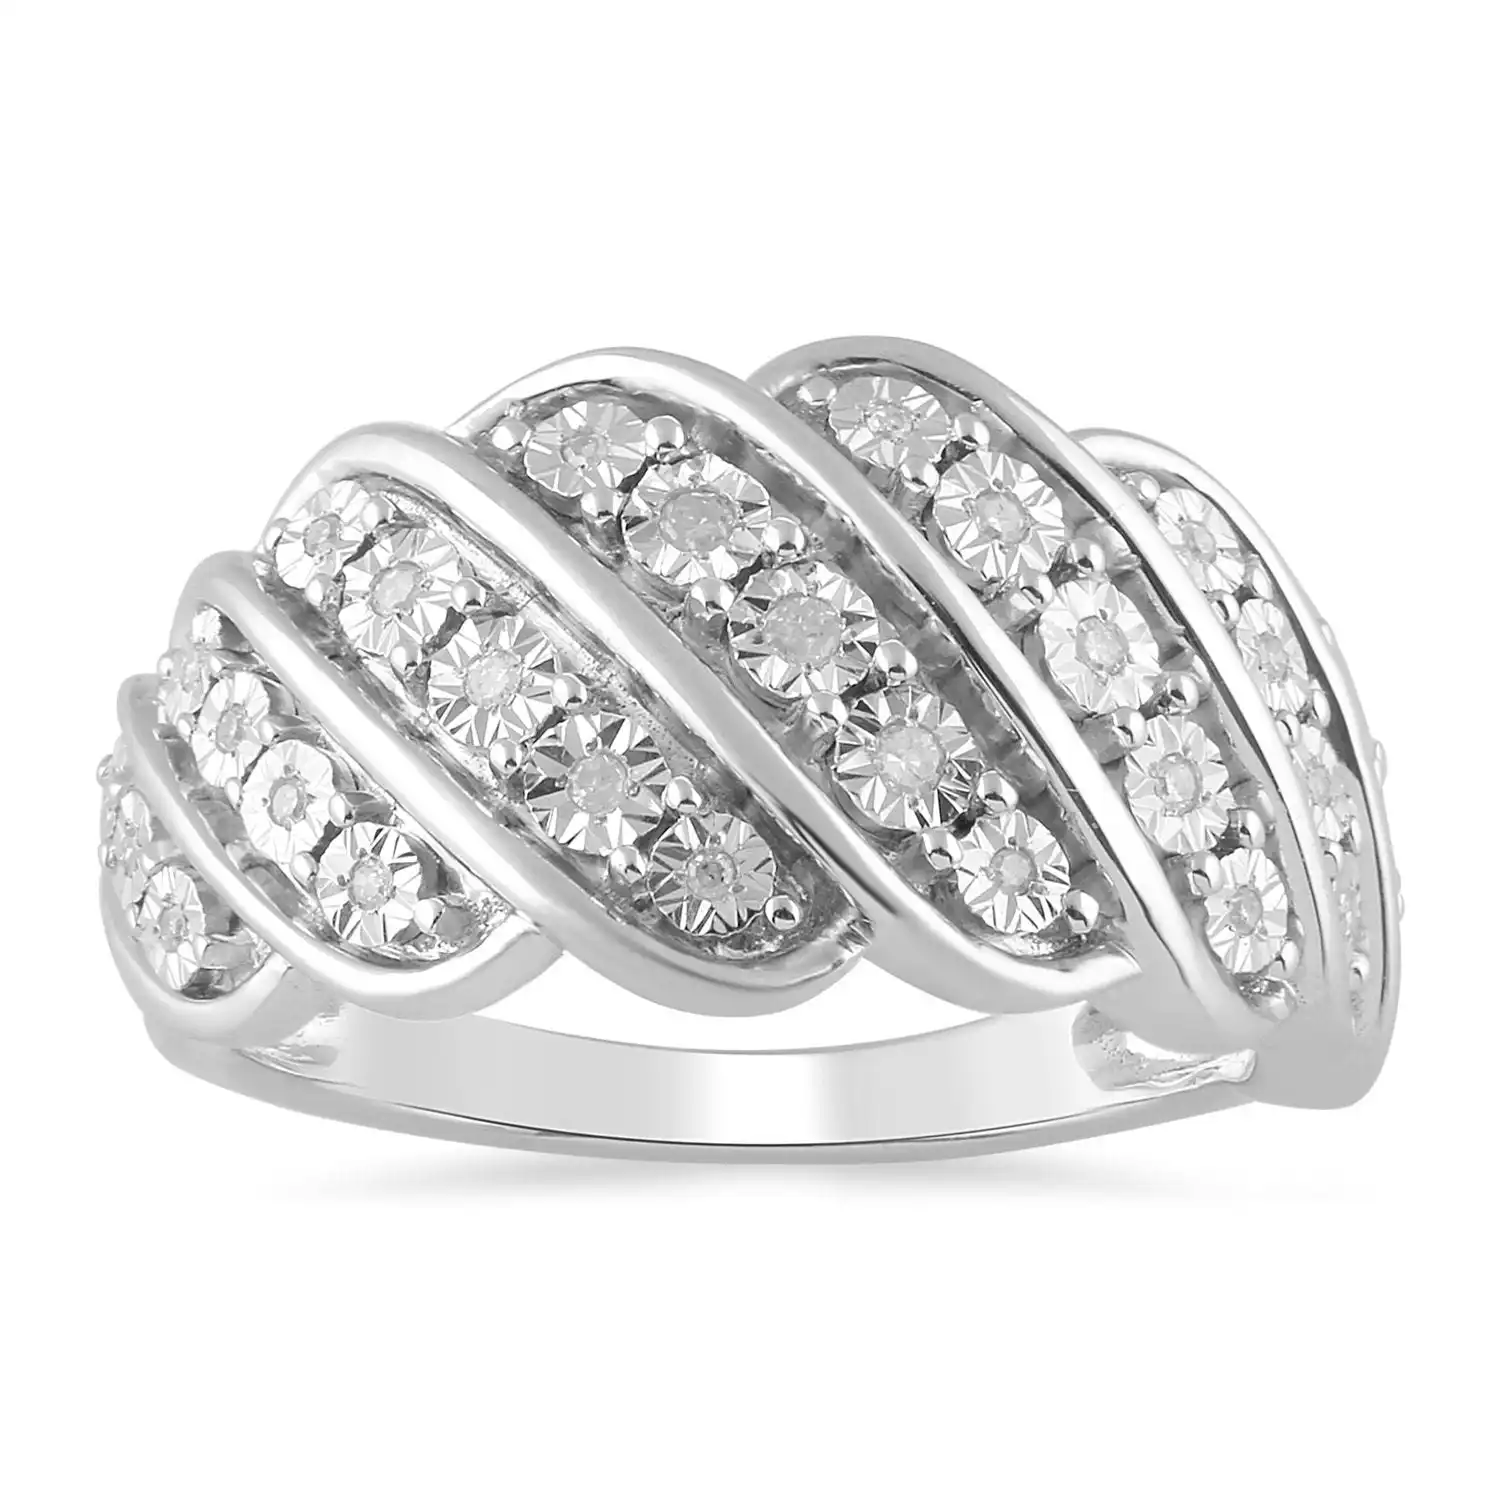 Mirage 7 Row Ring with 0.10ct of Diamonds in Sterling Silver